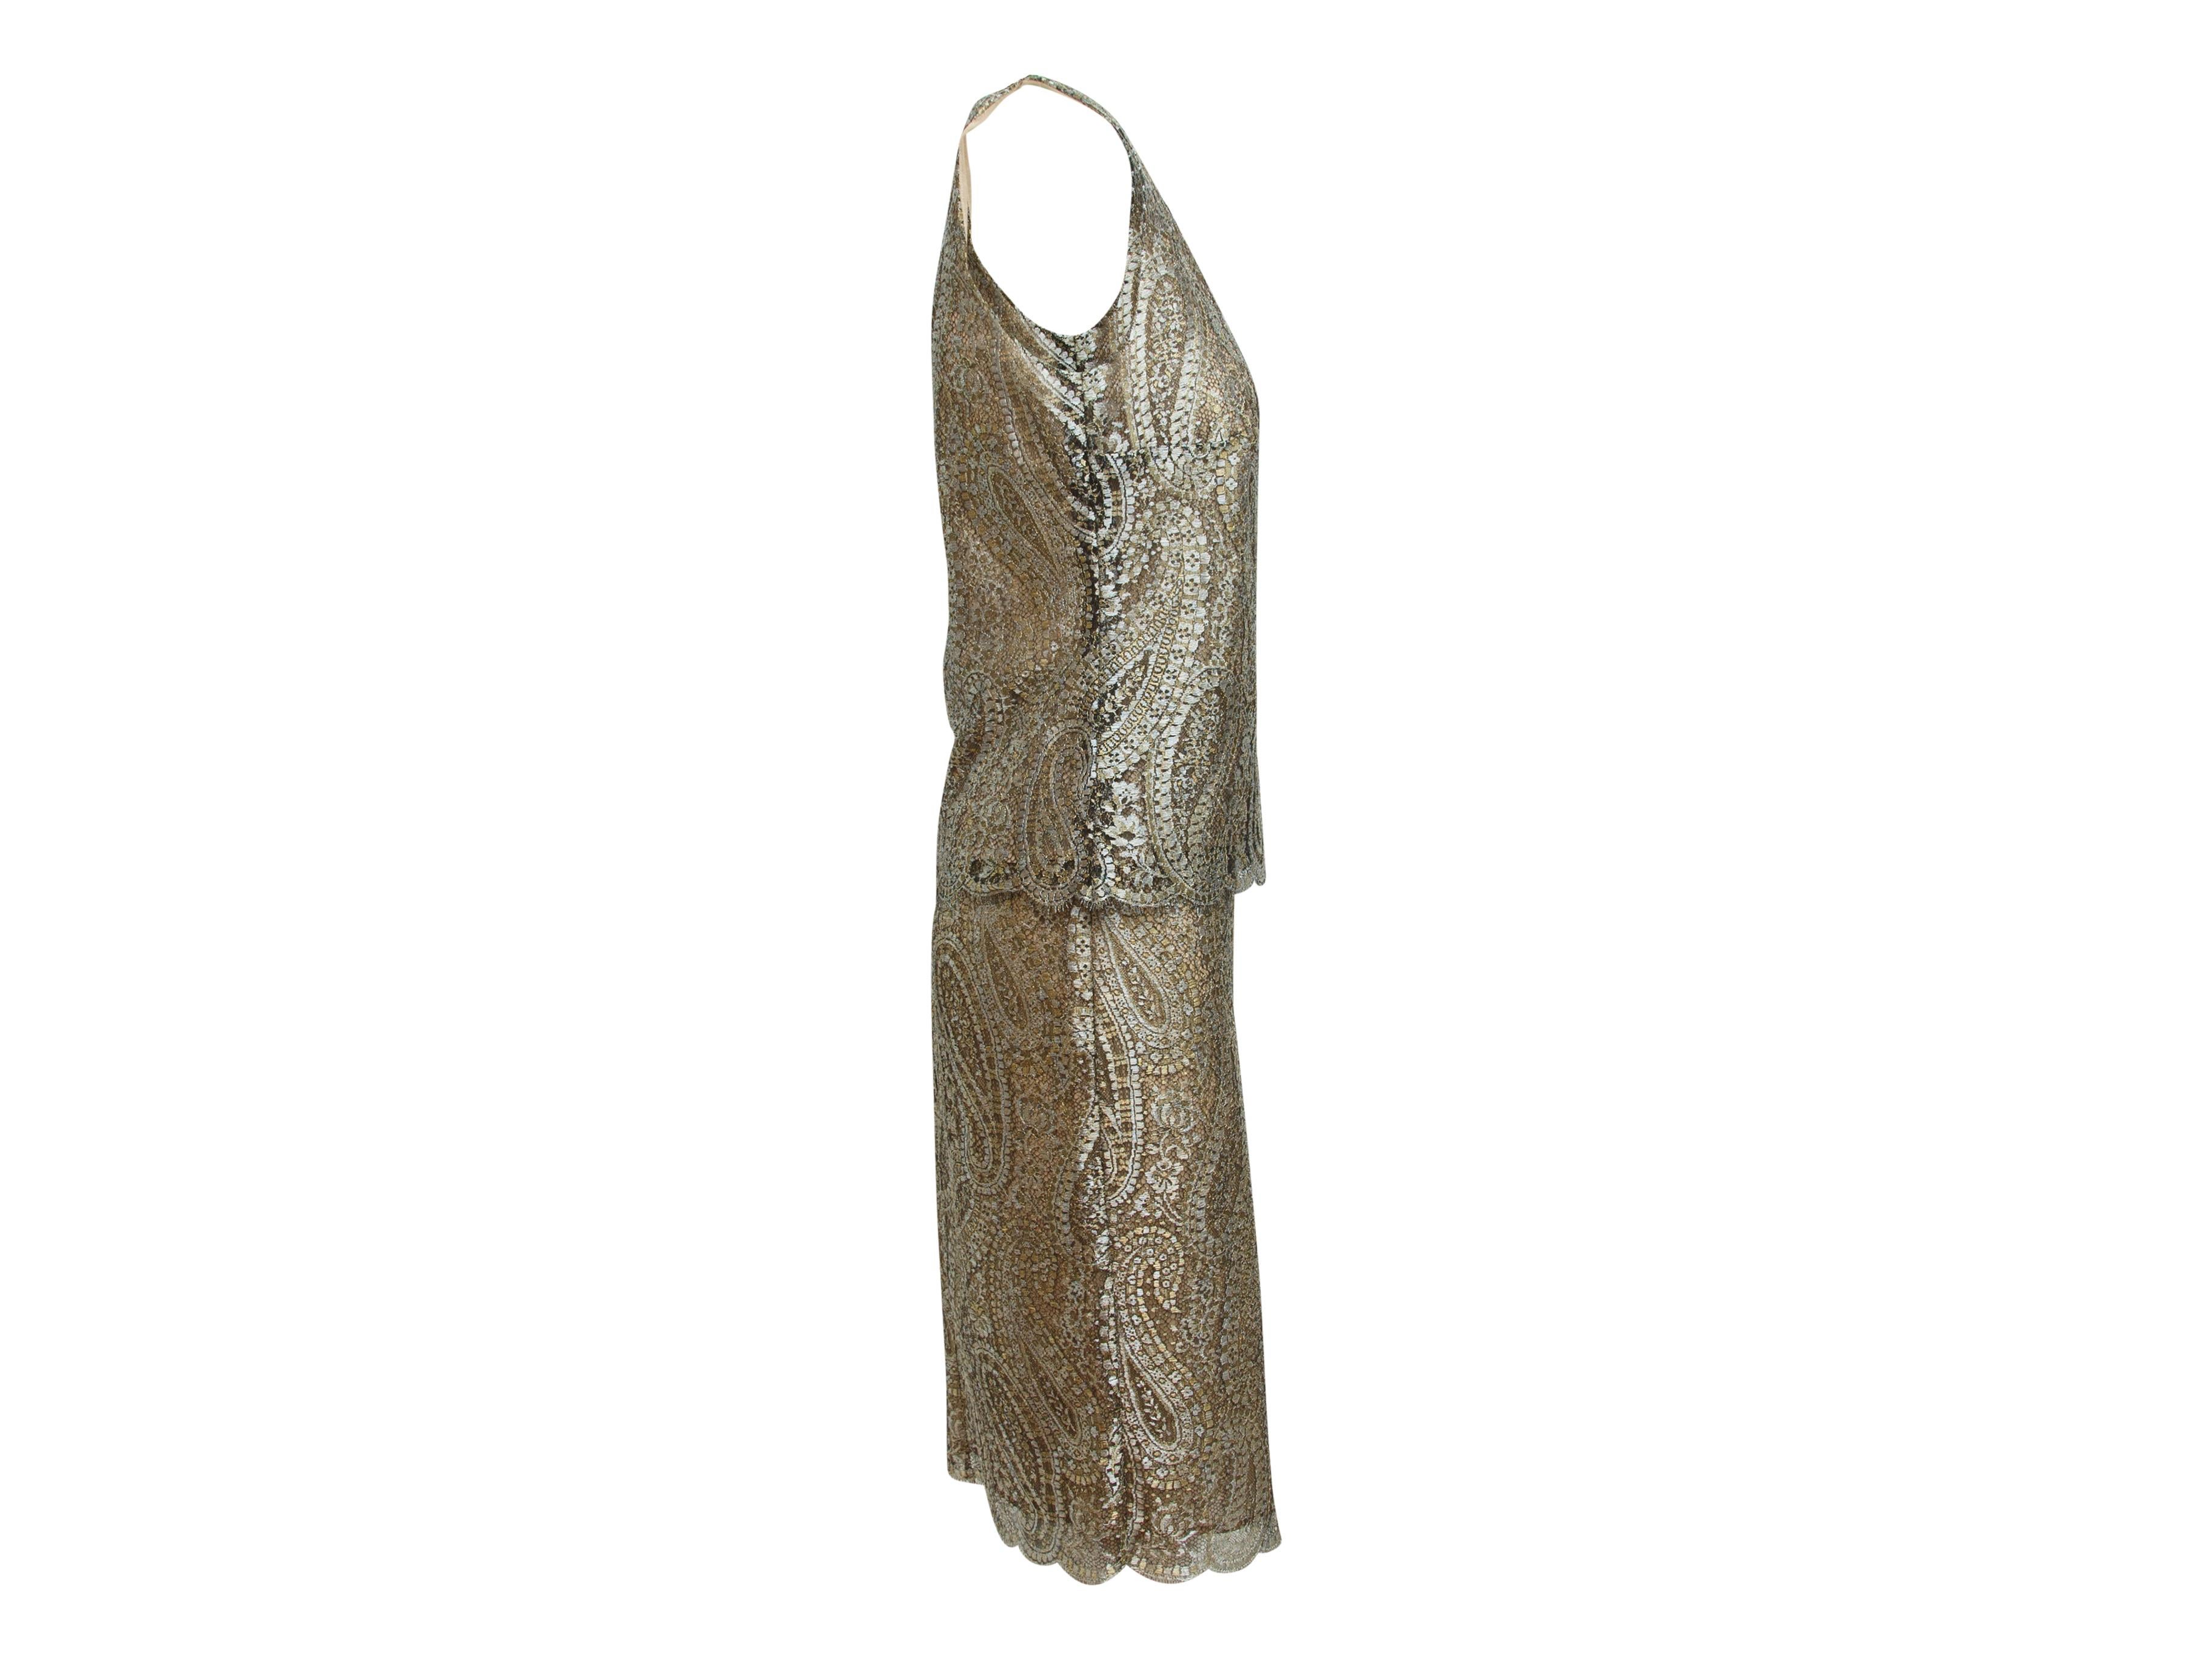 Product details: Metallic brocade Chanel sleeveless skirt set is an outfit that can be worn during holiday parties and summer weddings.  Both items are lined in nude. The shell has a scoop neck, scalloped hem, and closes in the back. The matching